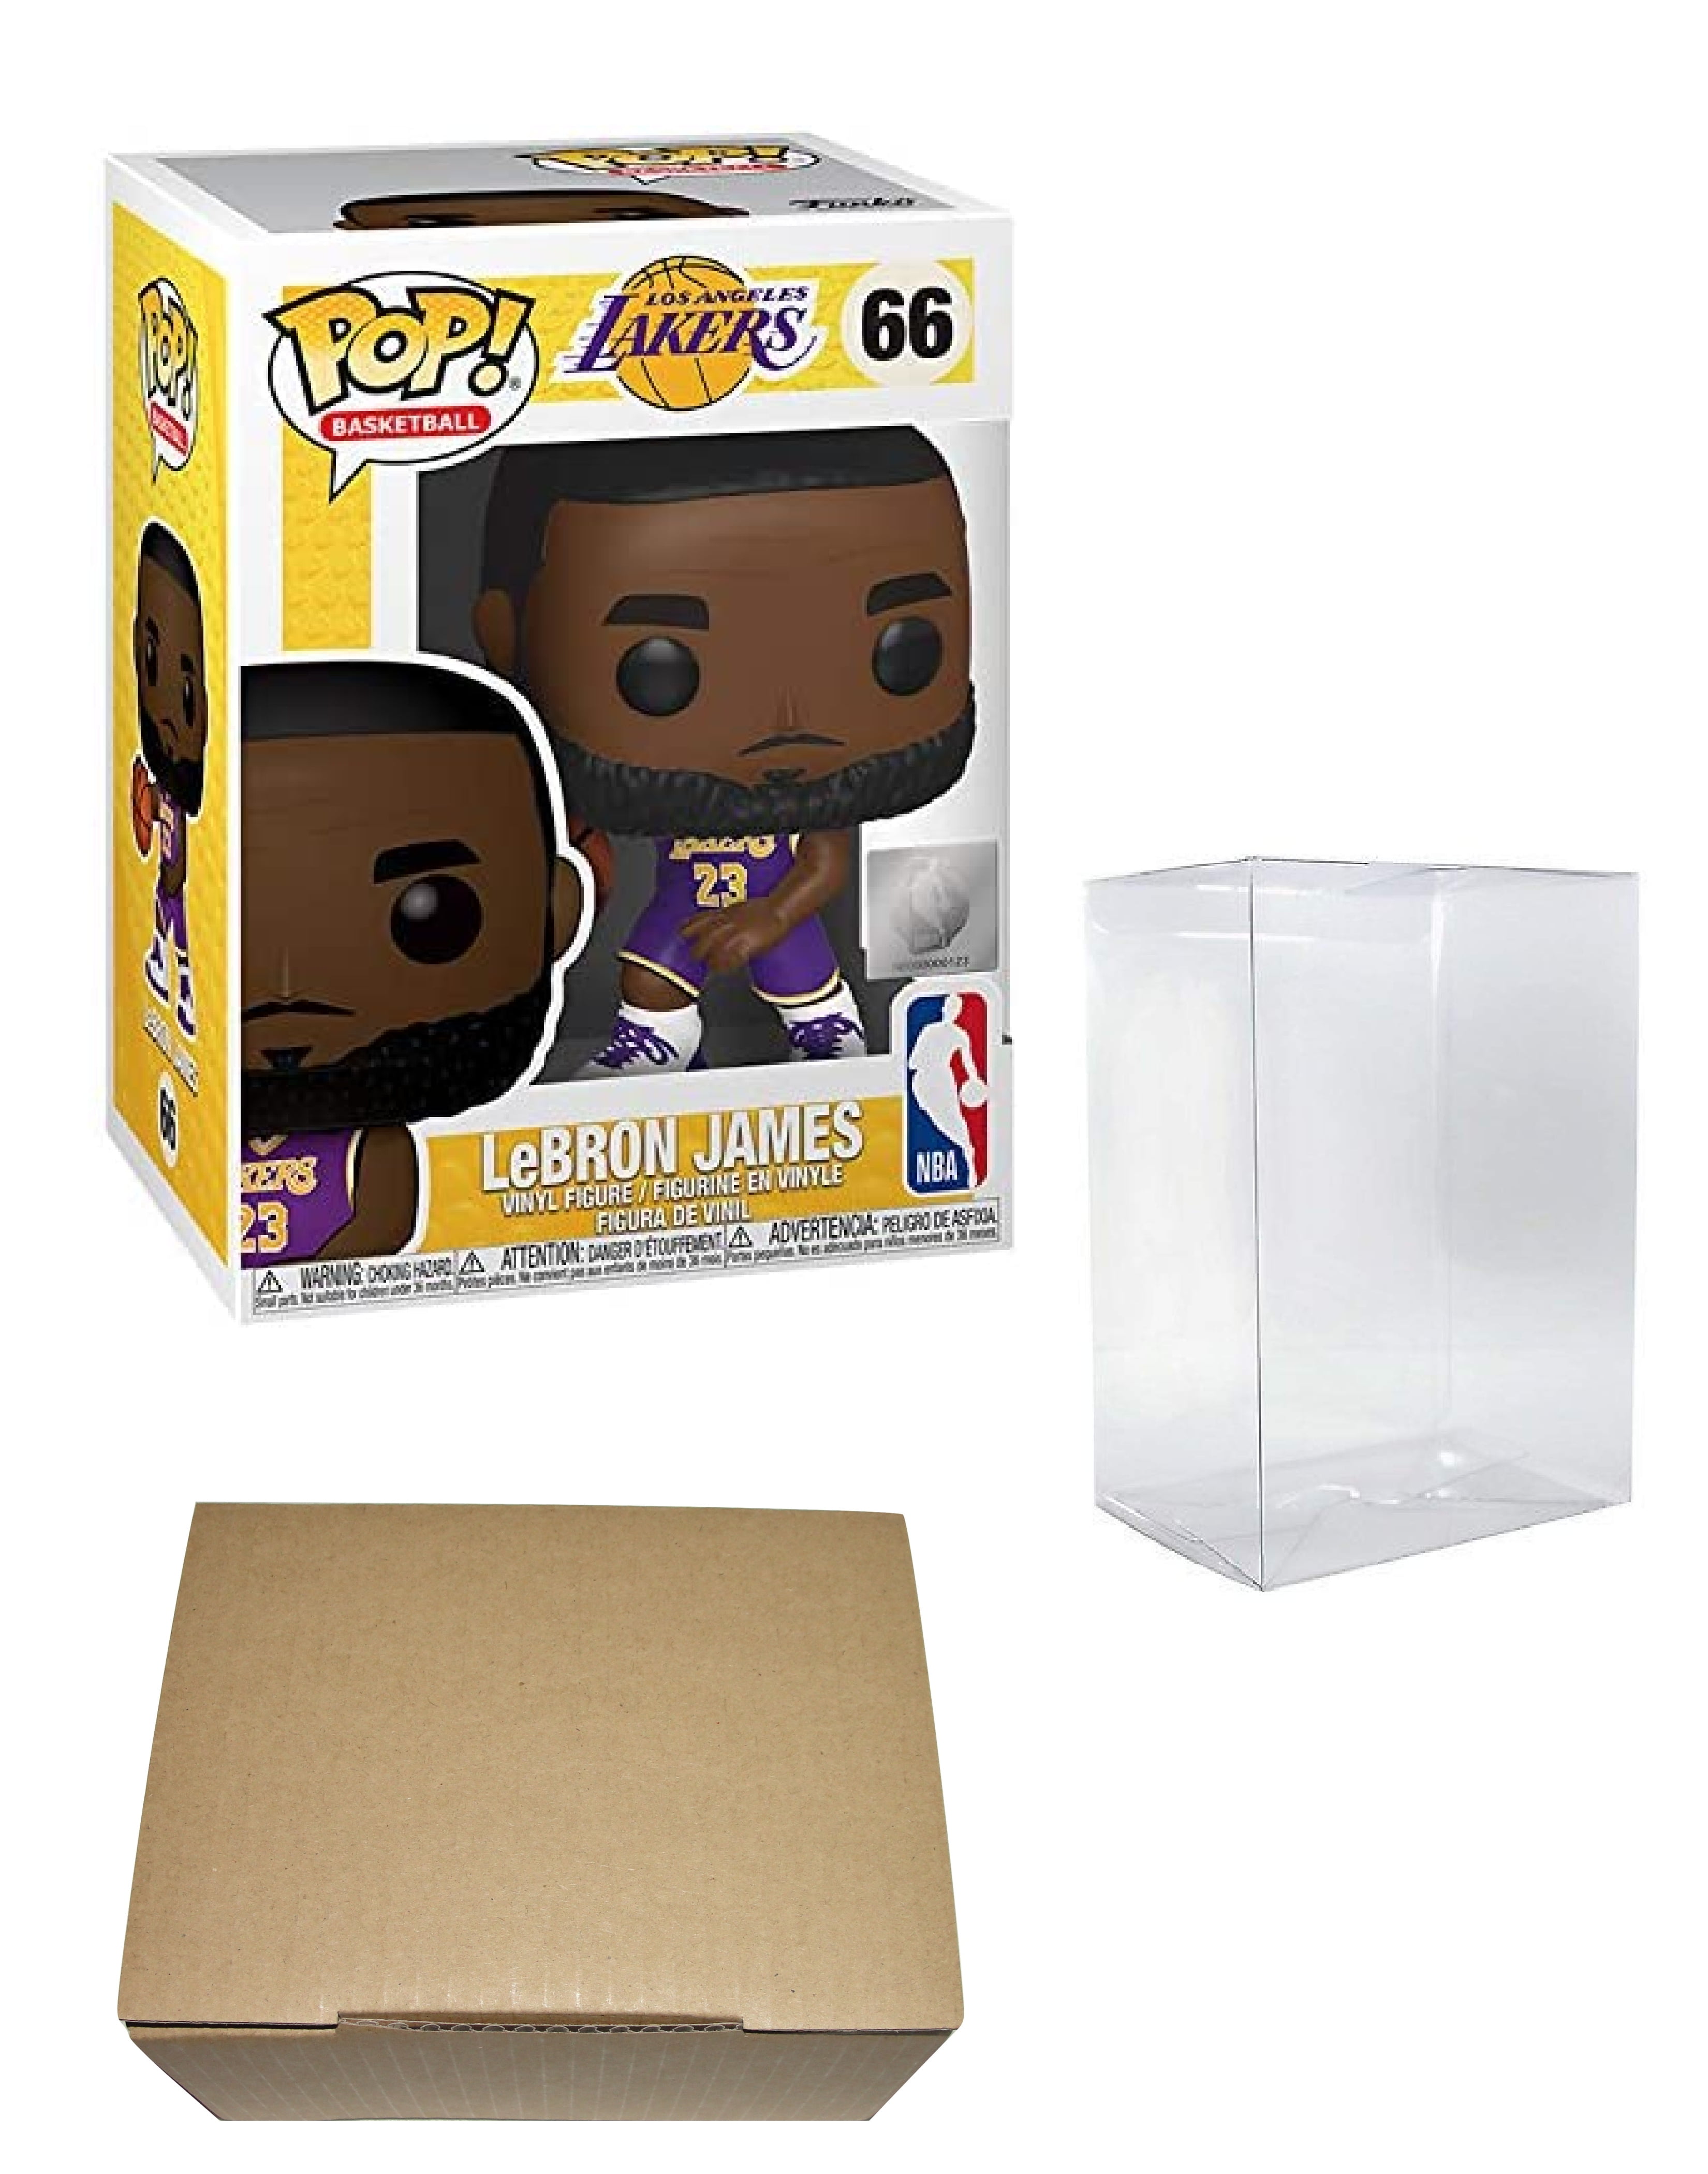 Lebron James LA Lakers Purple Jersey POP! Sports NBA Action Figure (Bundled  with Pop Protector to Protect Display Box)